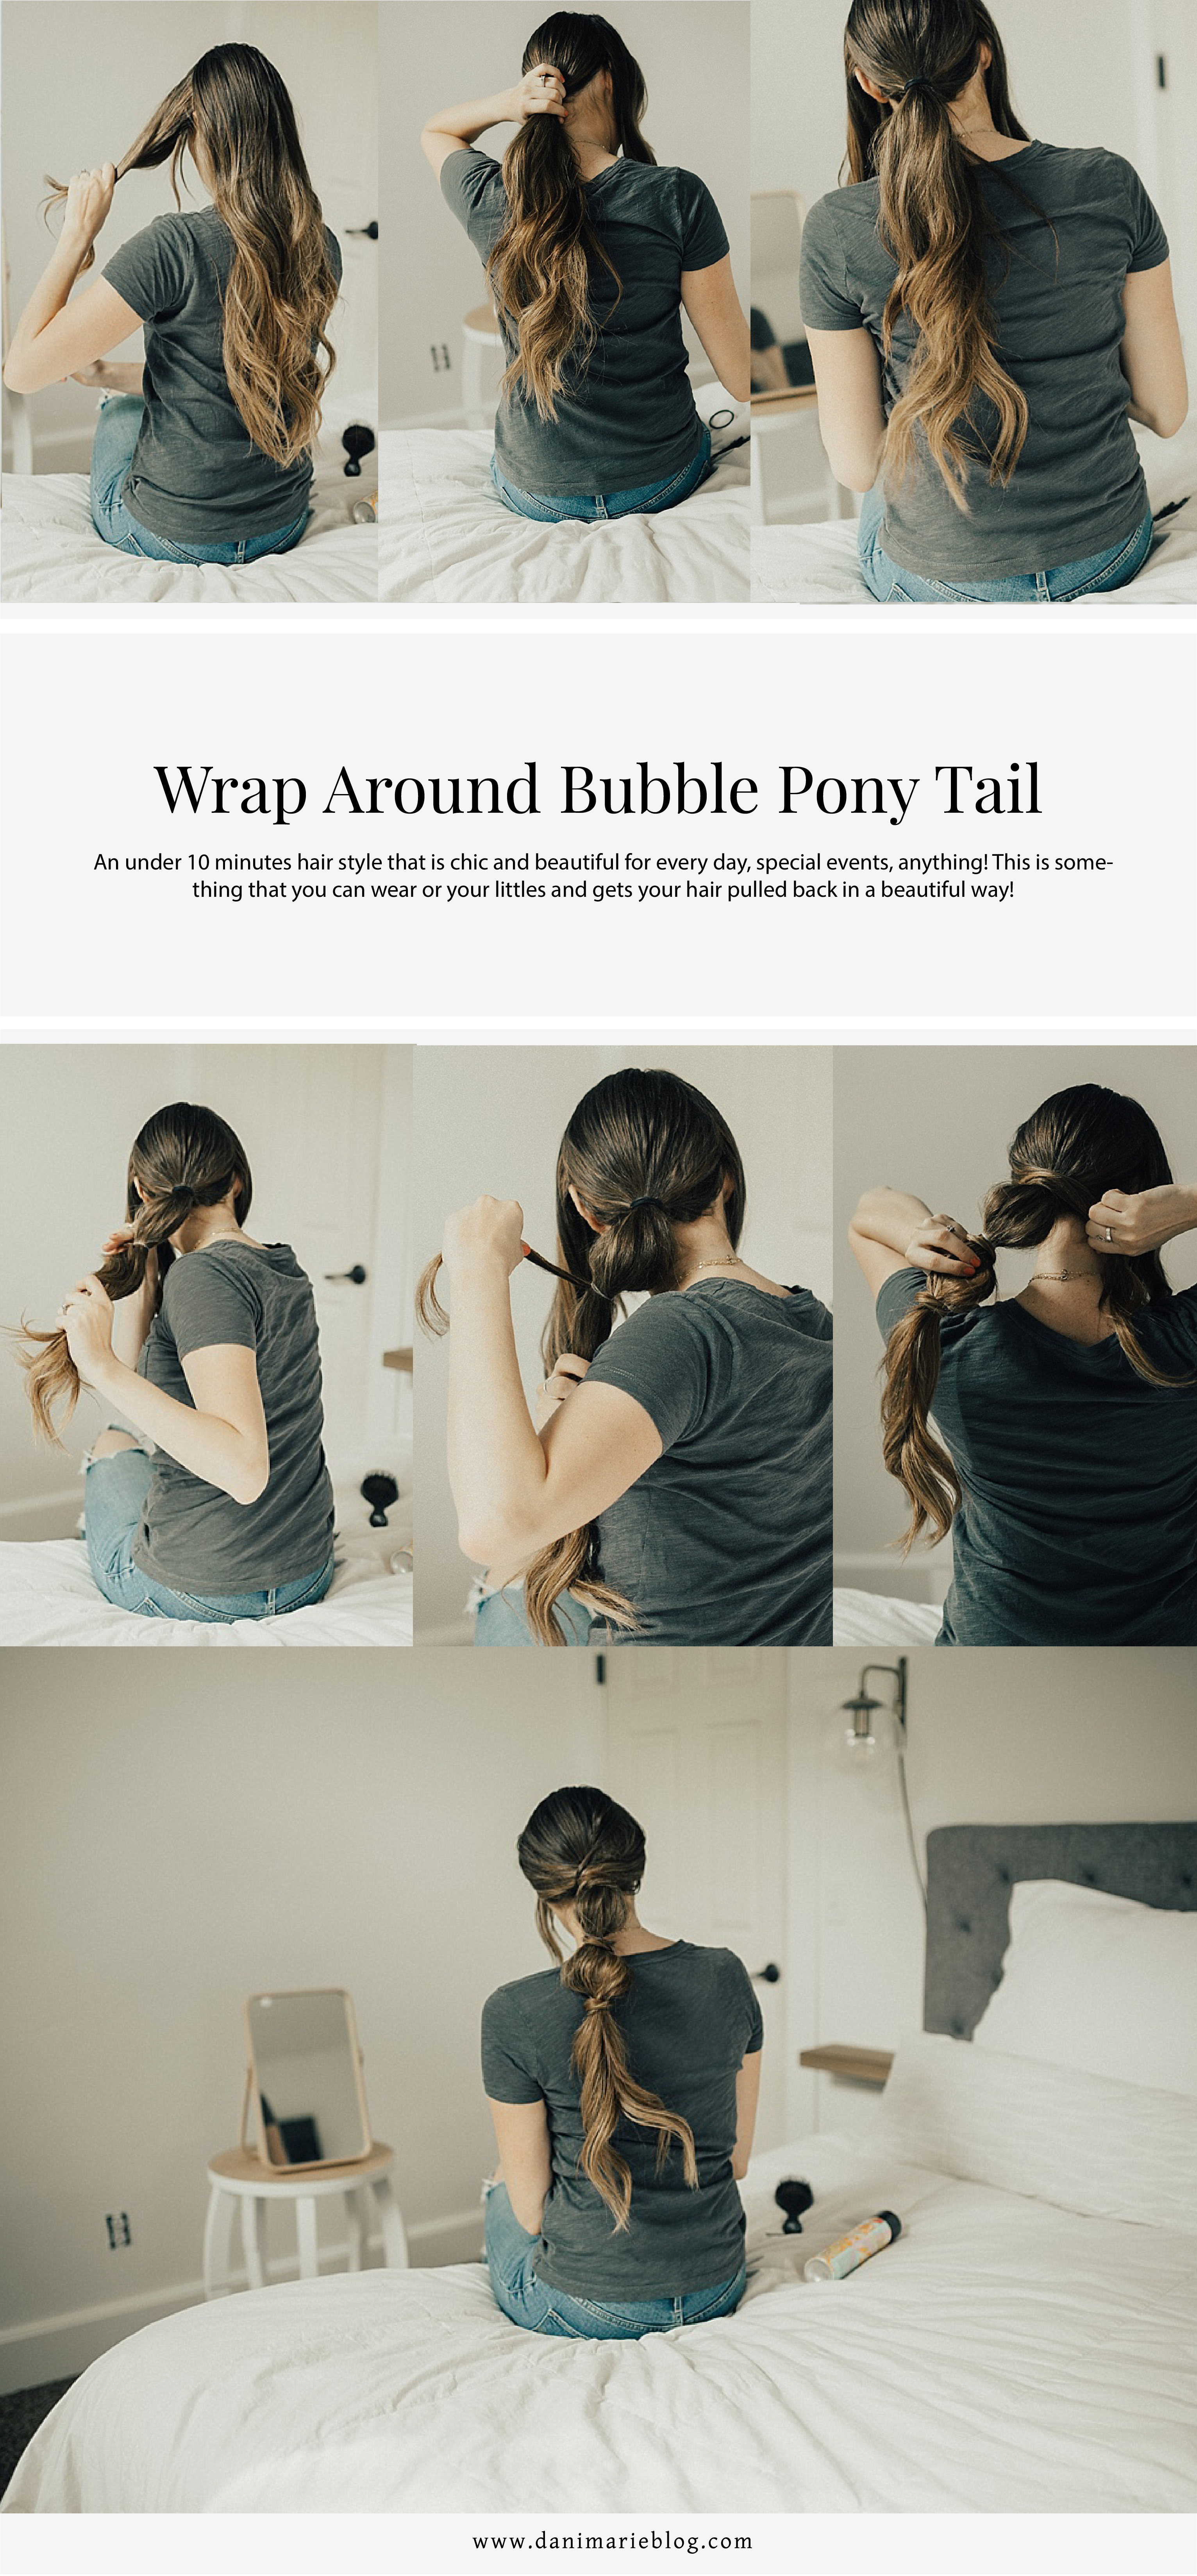 Easy Wrap Around Bubble Ponytail Tutorial by Utah style blogger Dani Marie